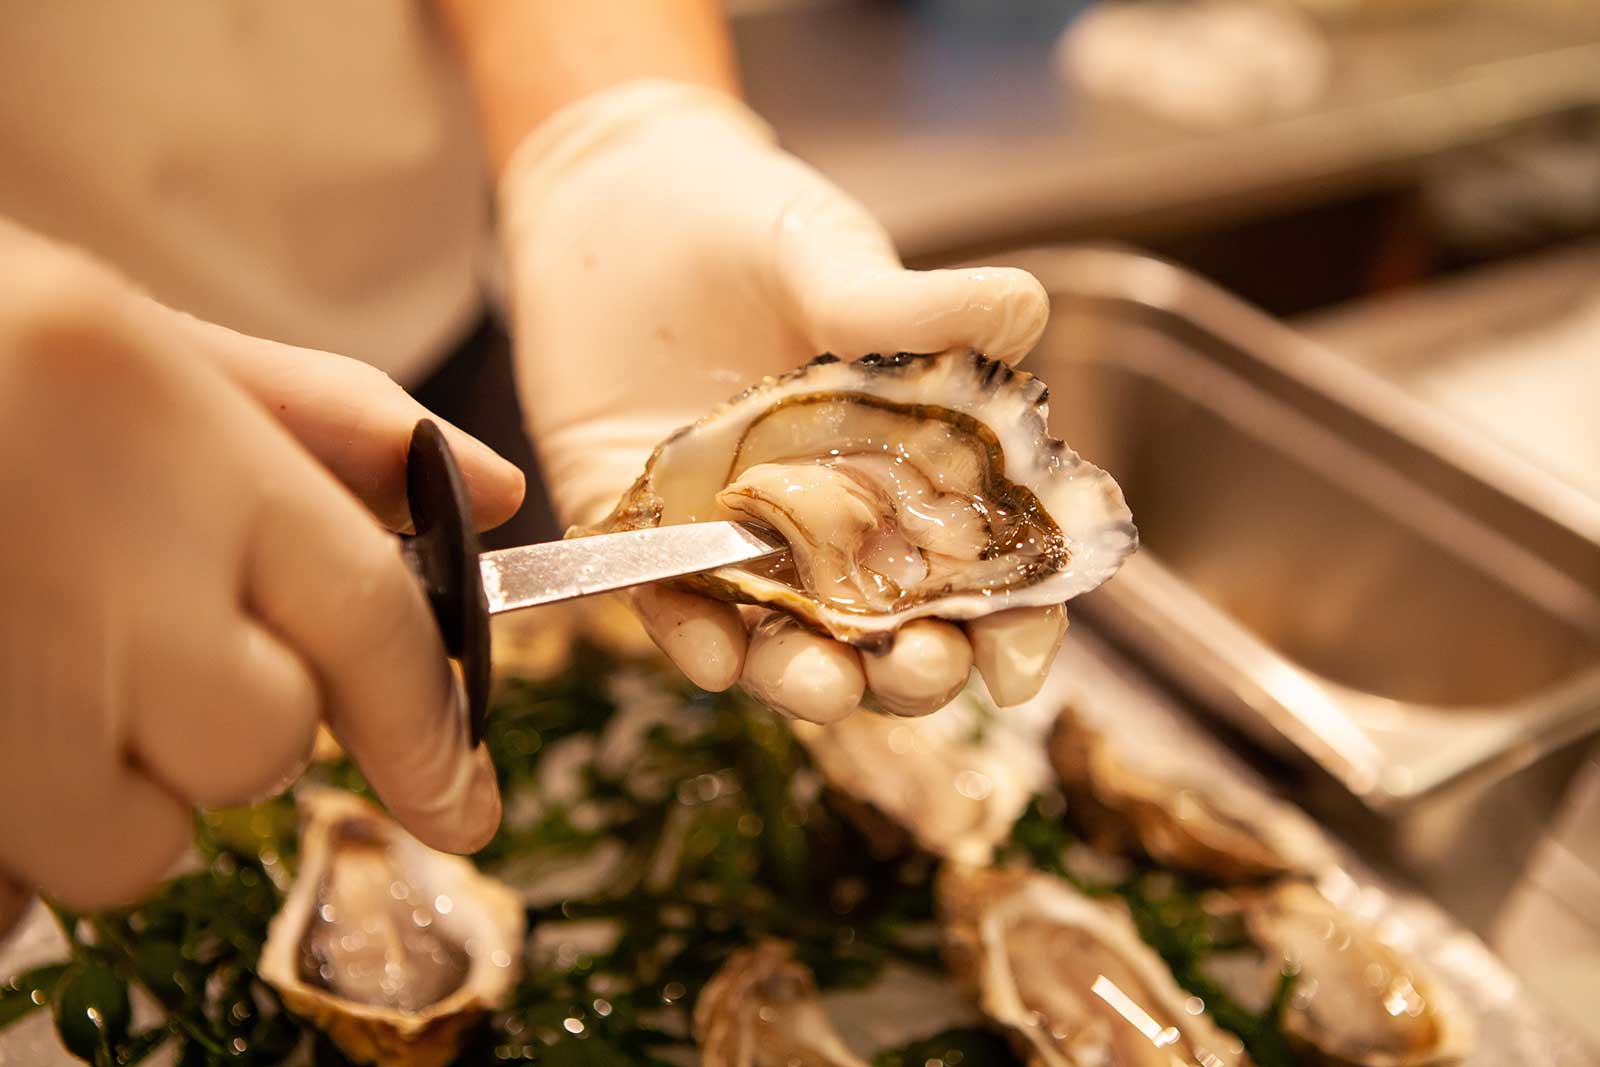 An oyster shell being shucked